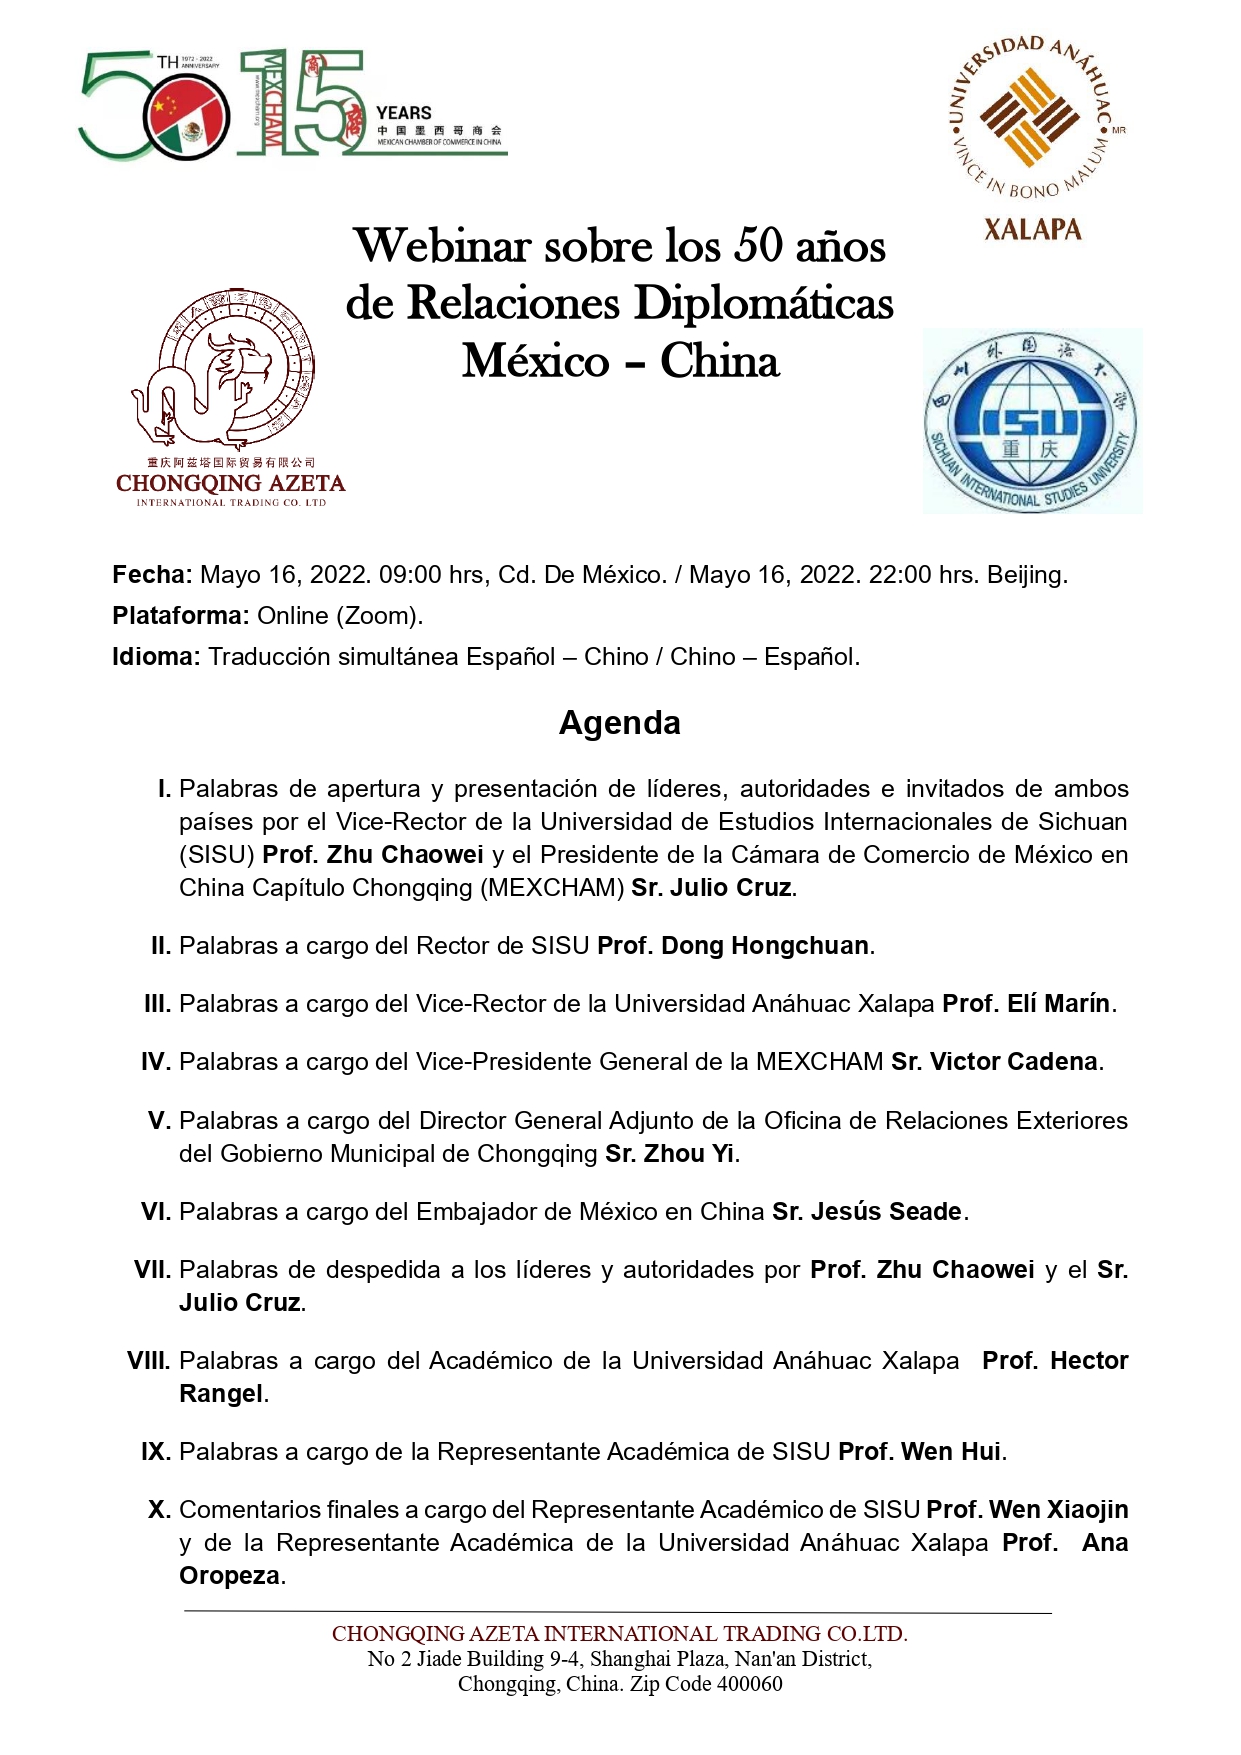 Webinar on the 50th anniversary of diplomatic relations Mexico-China